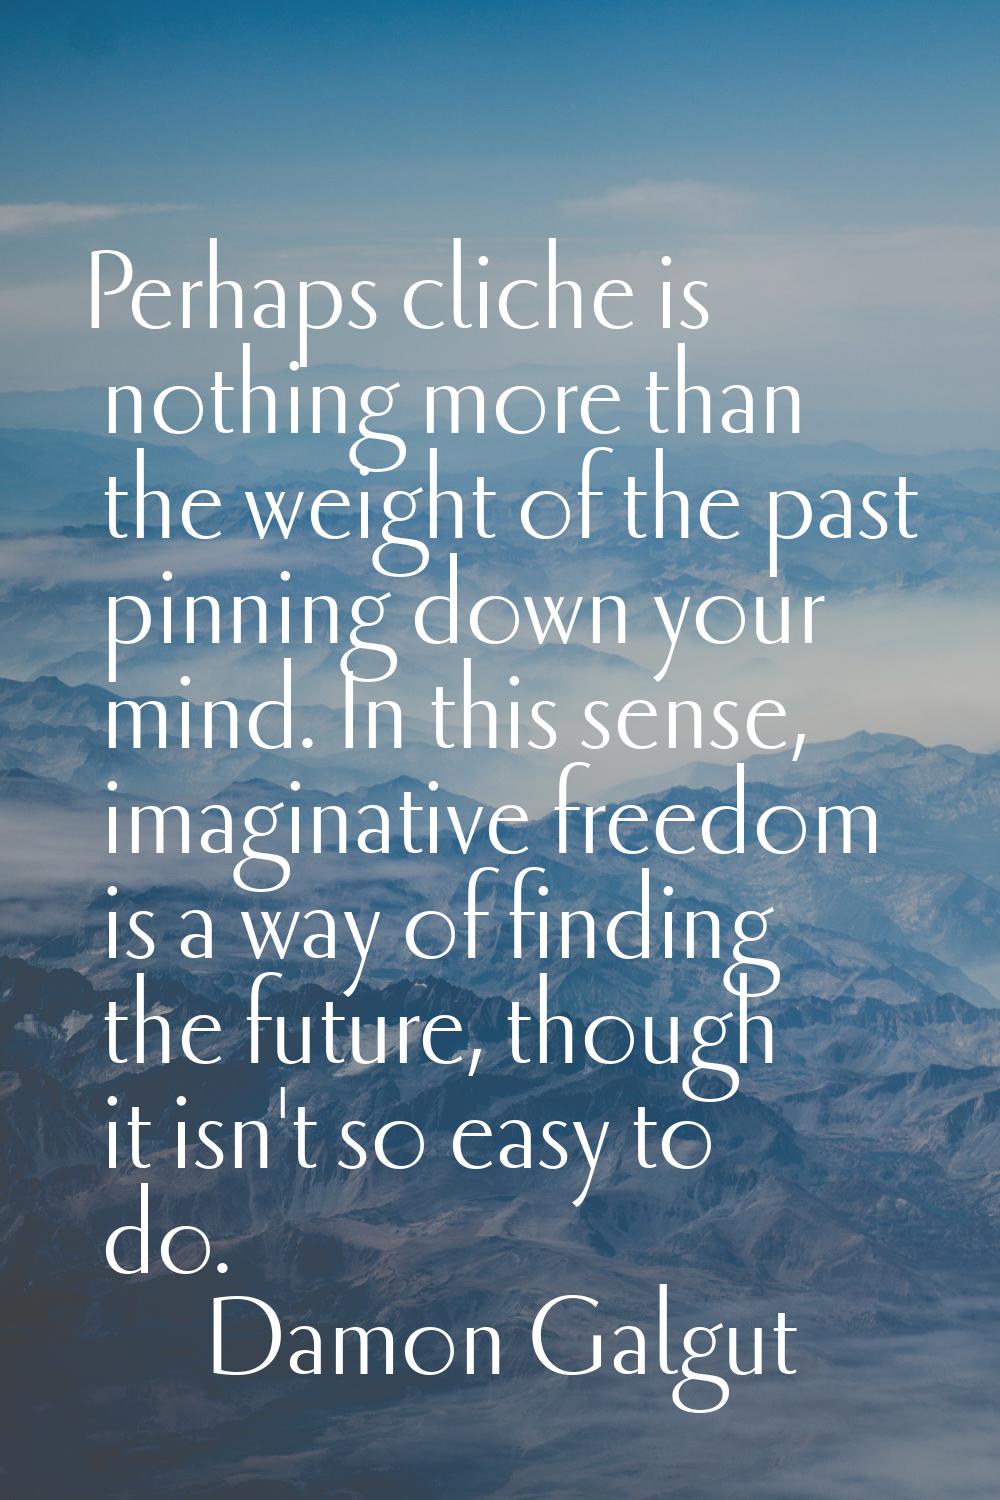 Perhaps cliche is nothing more than the weight of the past pinning down your mind. In this sense, i